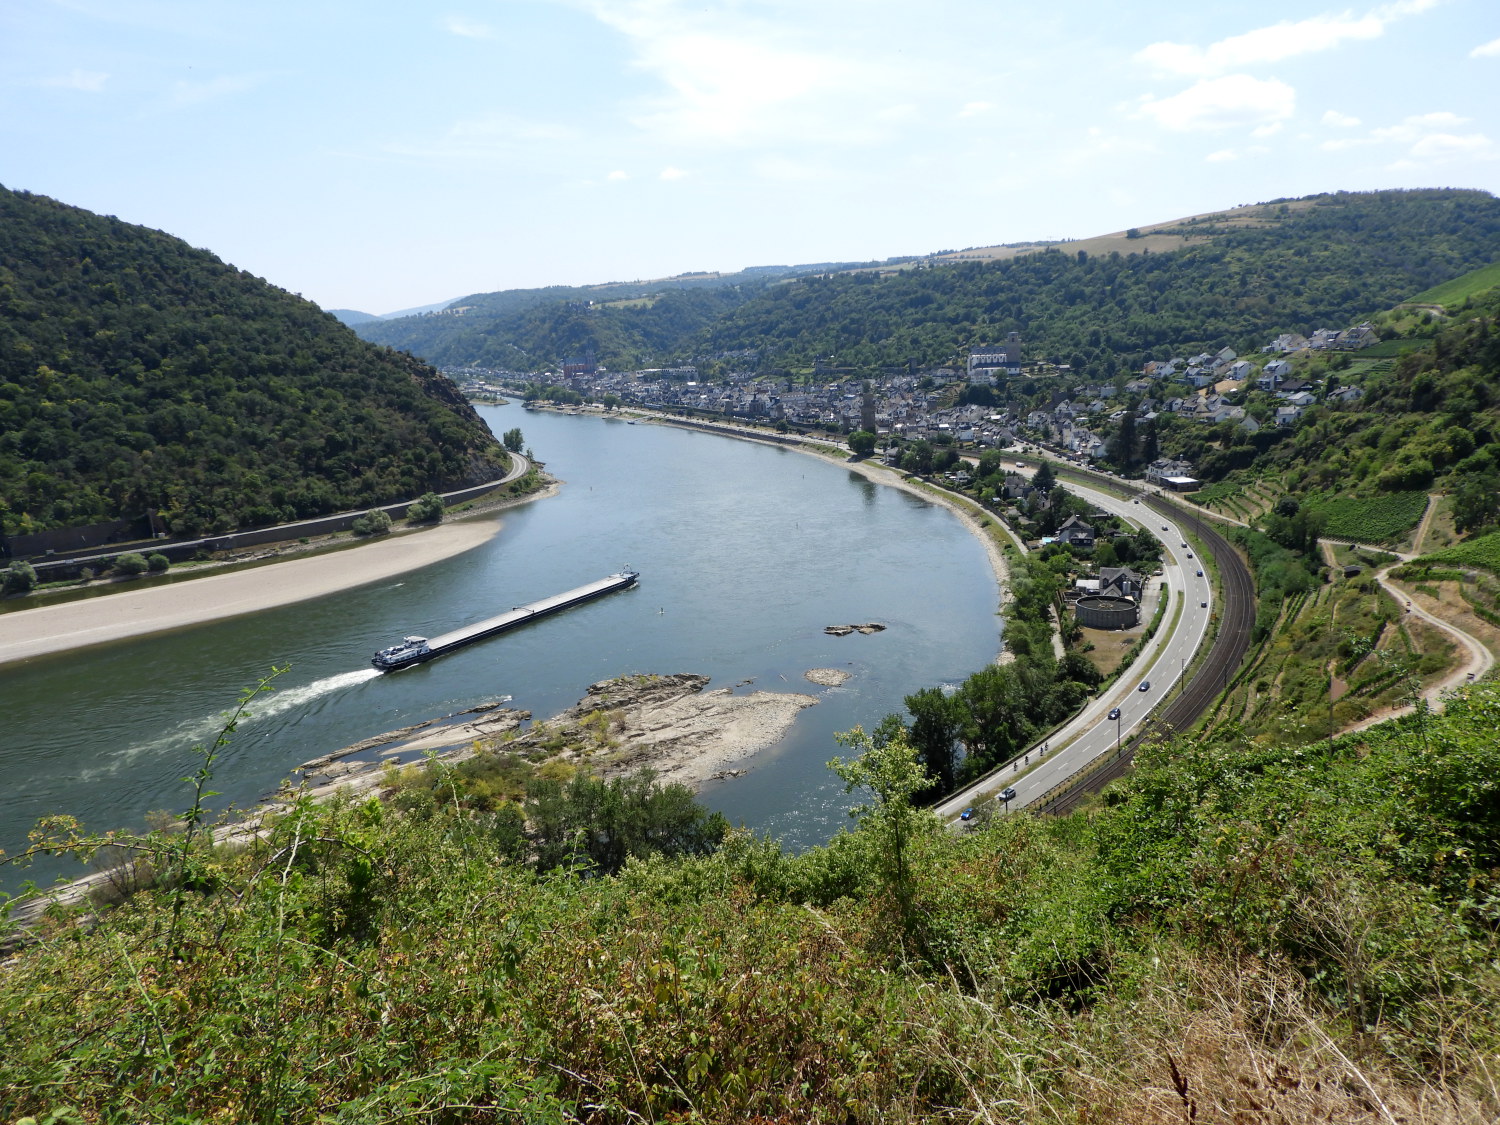 View of Oberwesel from Trollpfad